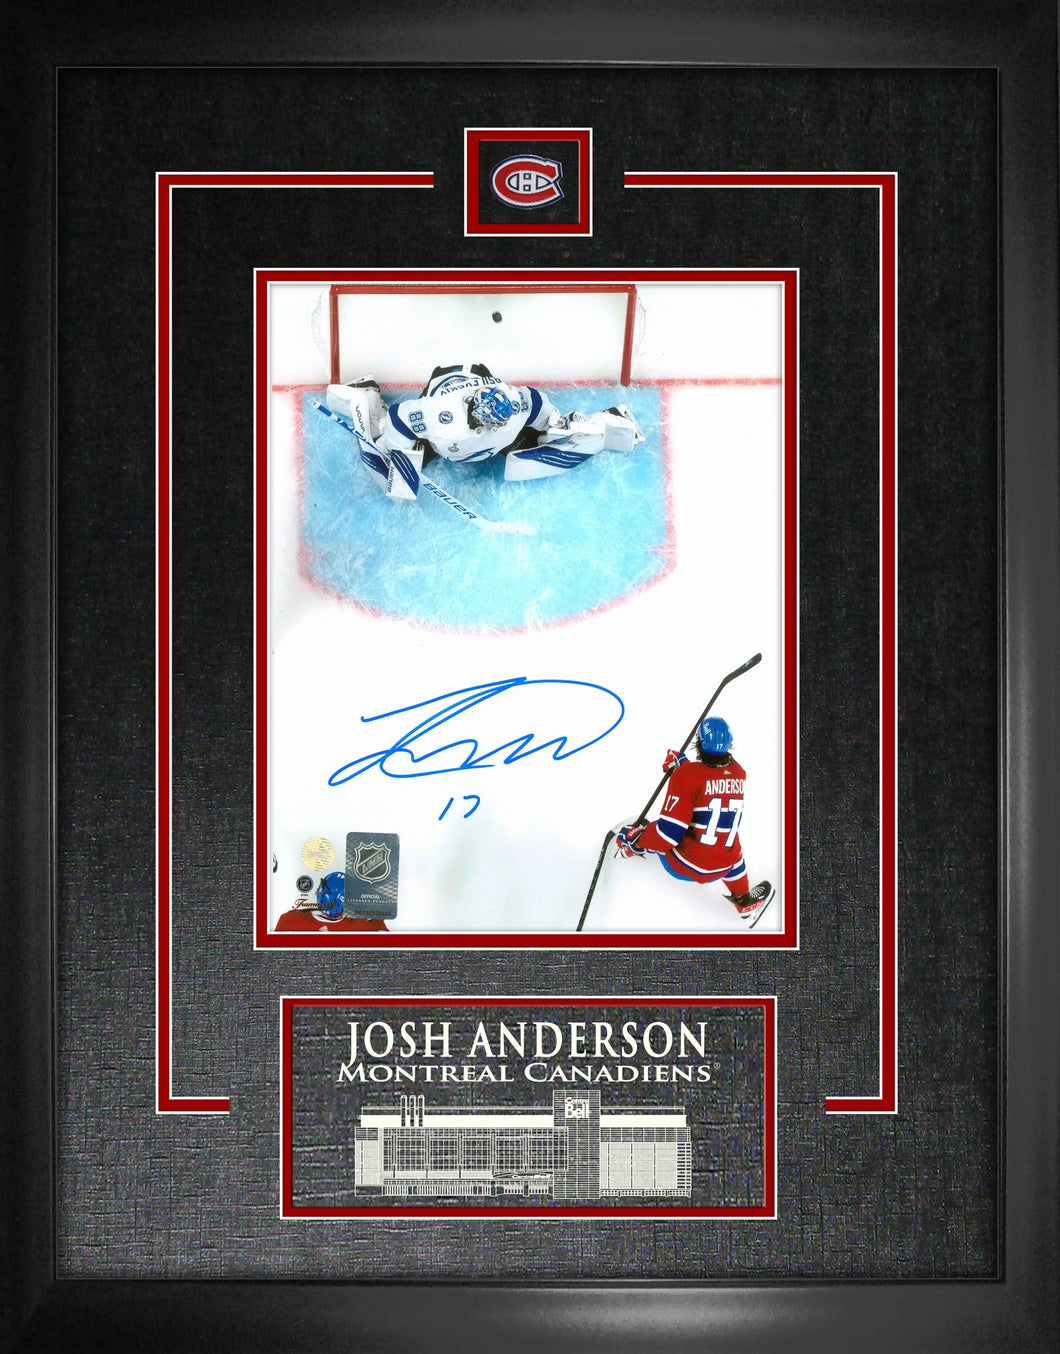 Josh Anderson Montreal Canadiens Signed Framed 8x10 Overhead Scoring Photo